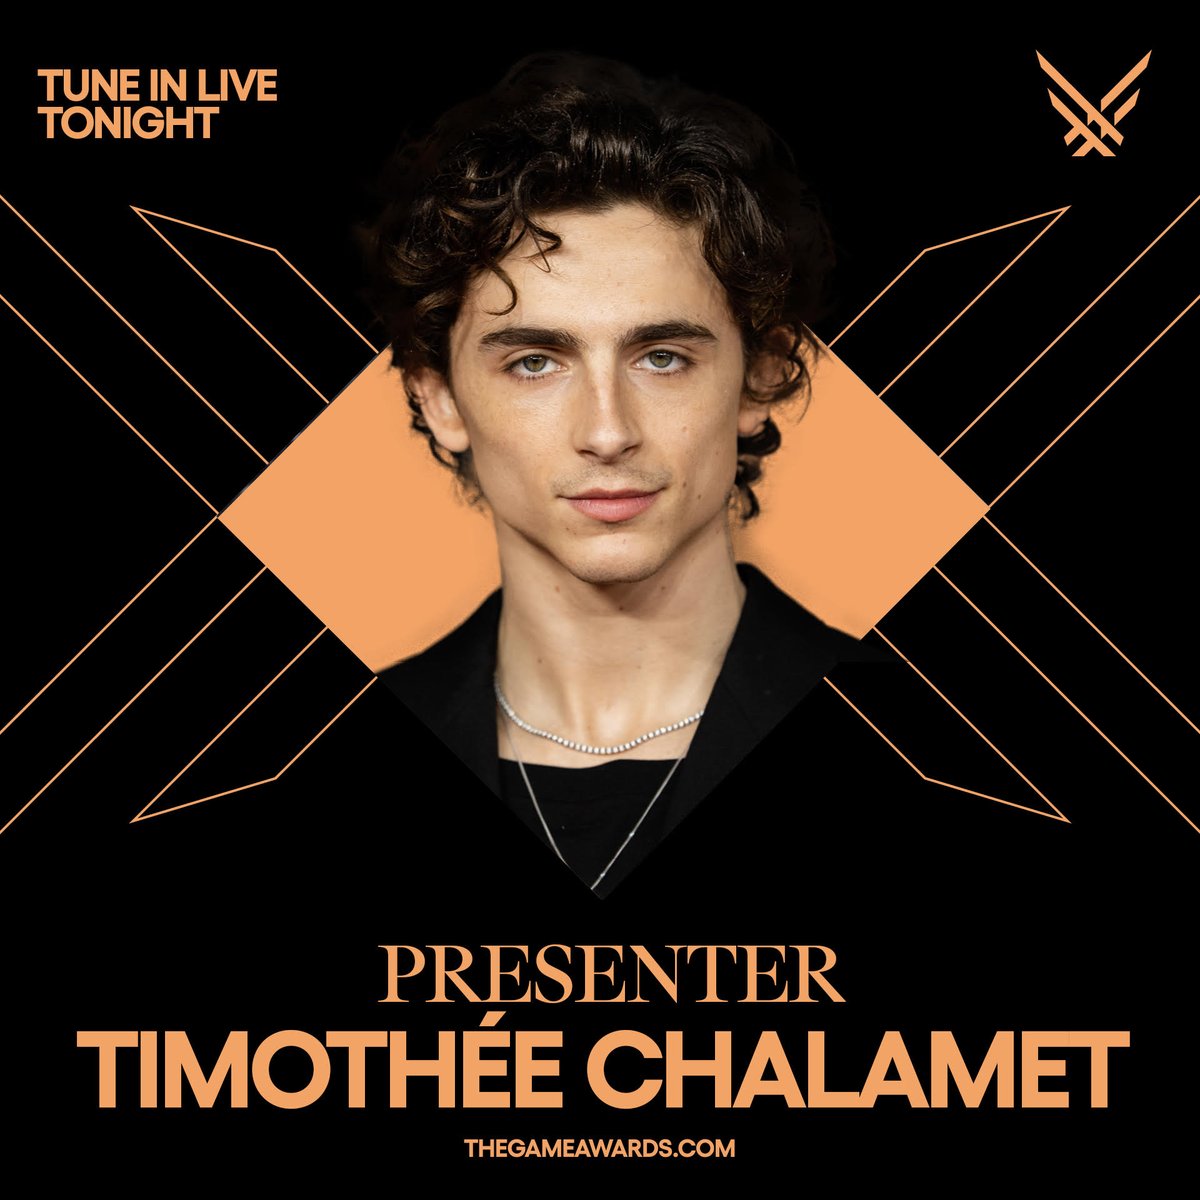 Tonight, #TheGameAwards welcomes @WonkaMovie and @DuneMovie star Timothée Chalamet to video game's biggest night as a presenter. 

Watch the free global livestream at thegameawards.com

⏰ 4:30p PT / 7:30p ET / 12:30a GMT